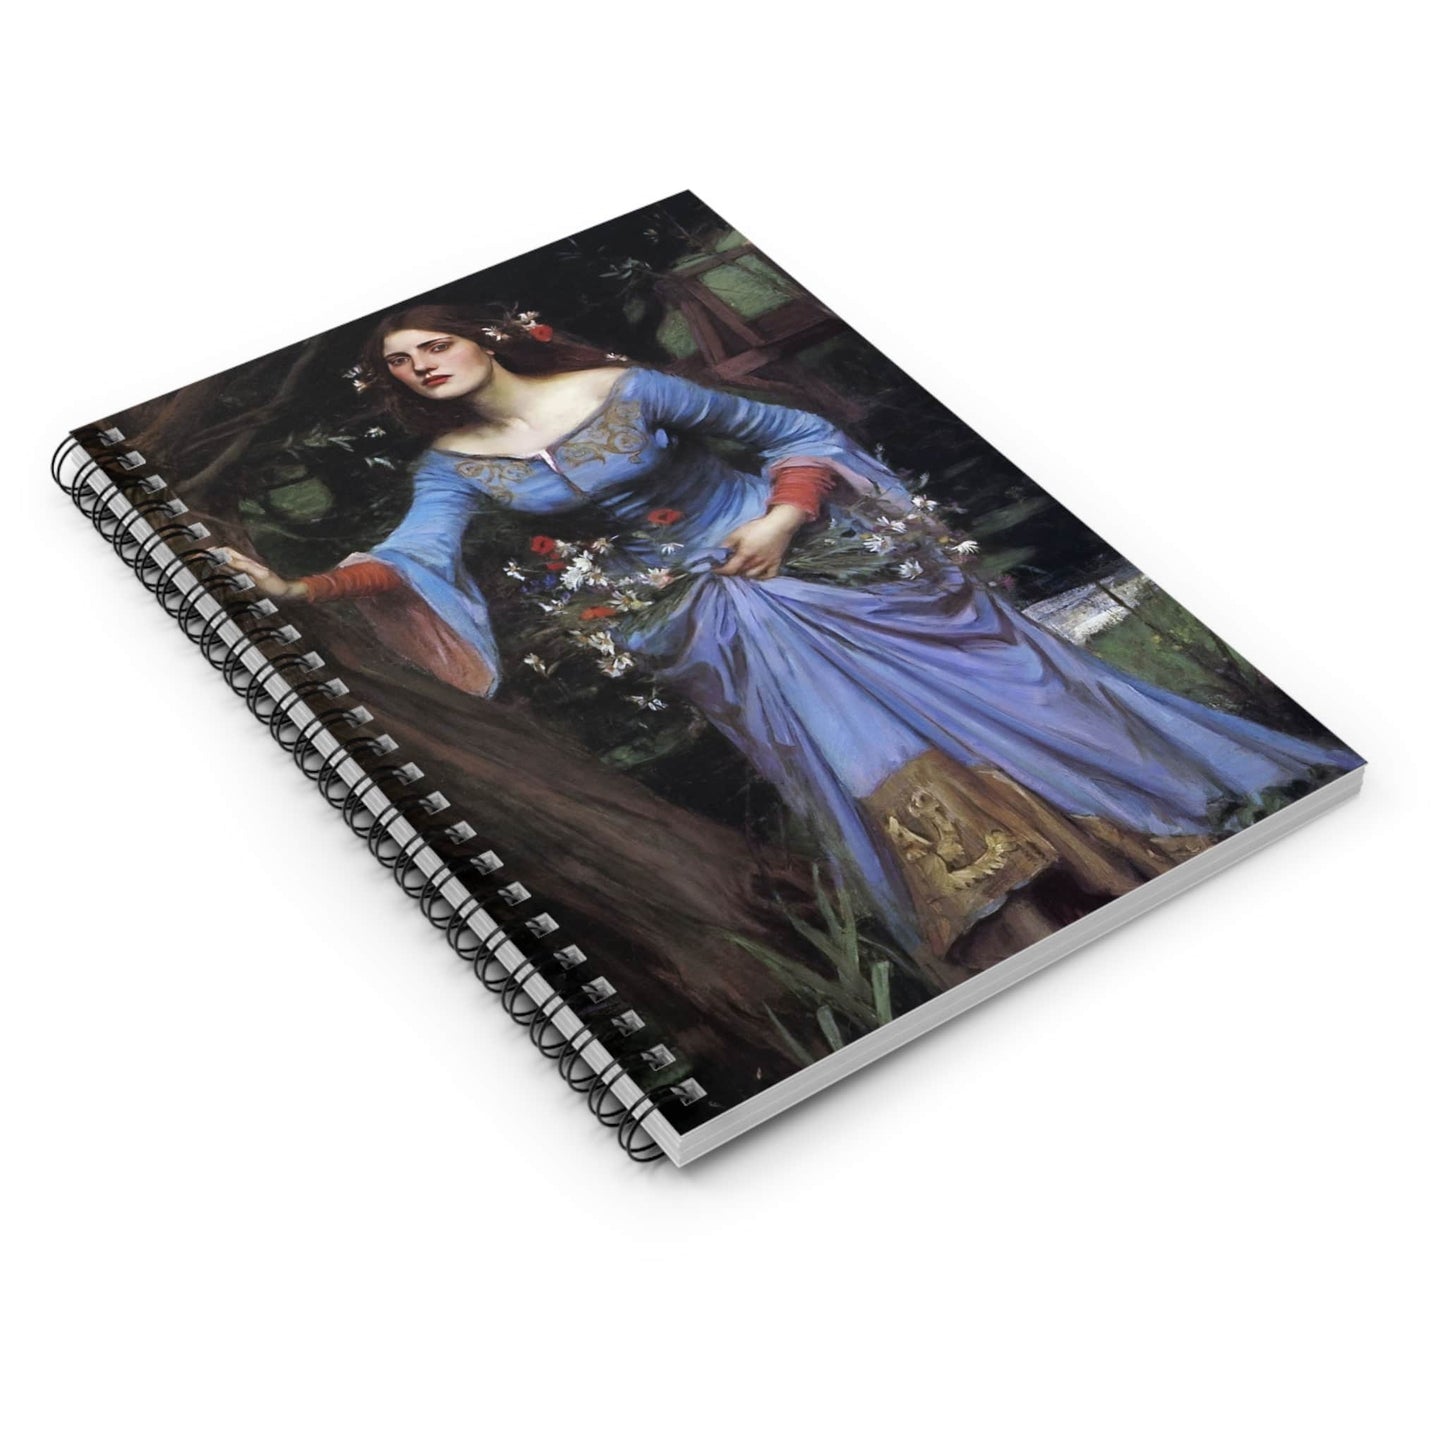 Romantic Spiral Notebook Laying Flat on White Surface